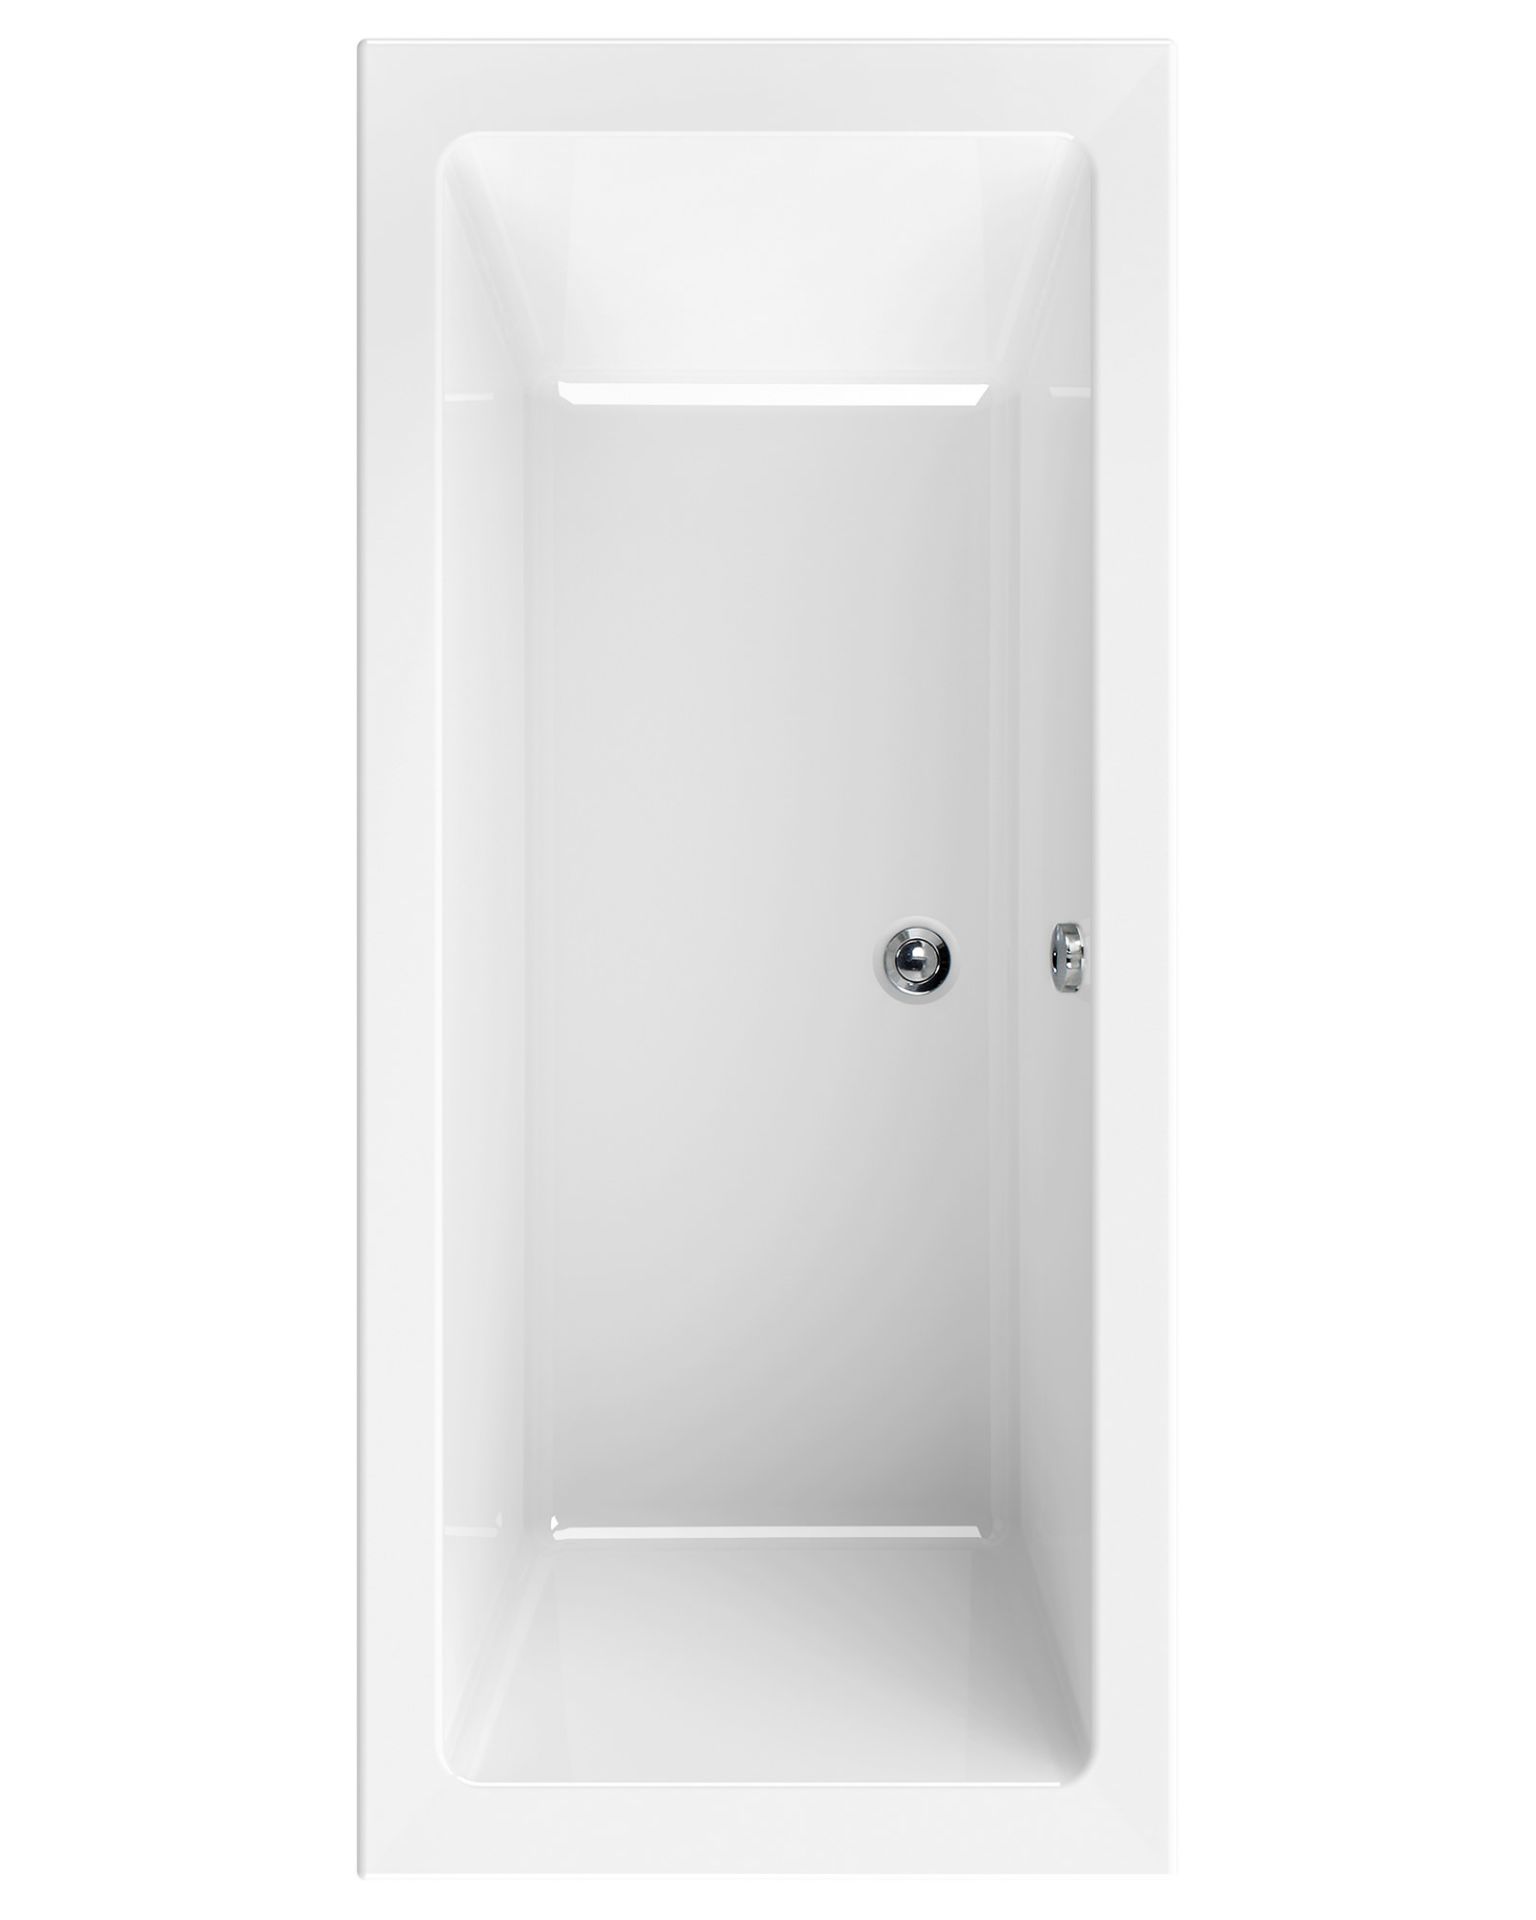 (PC2) 2000x900mm Keramag Deep Double Ended Bath. RRP £997.99. Our range of double ended baths...( - Image 4 of 5